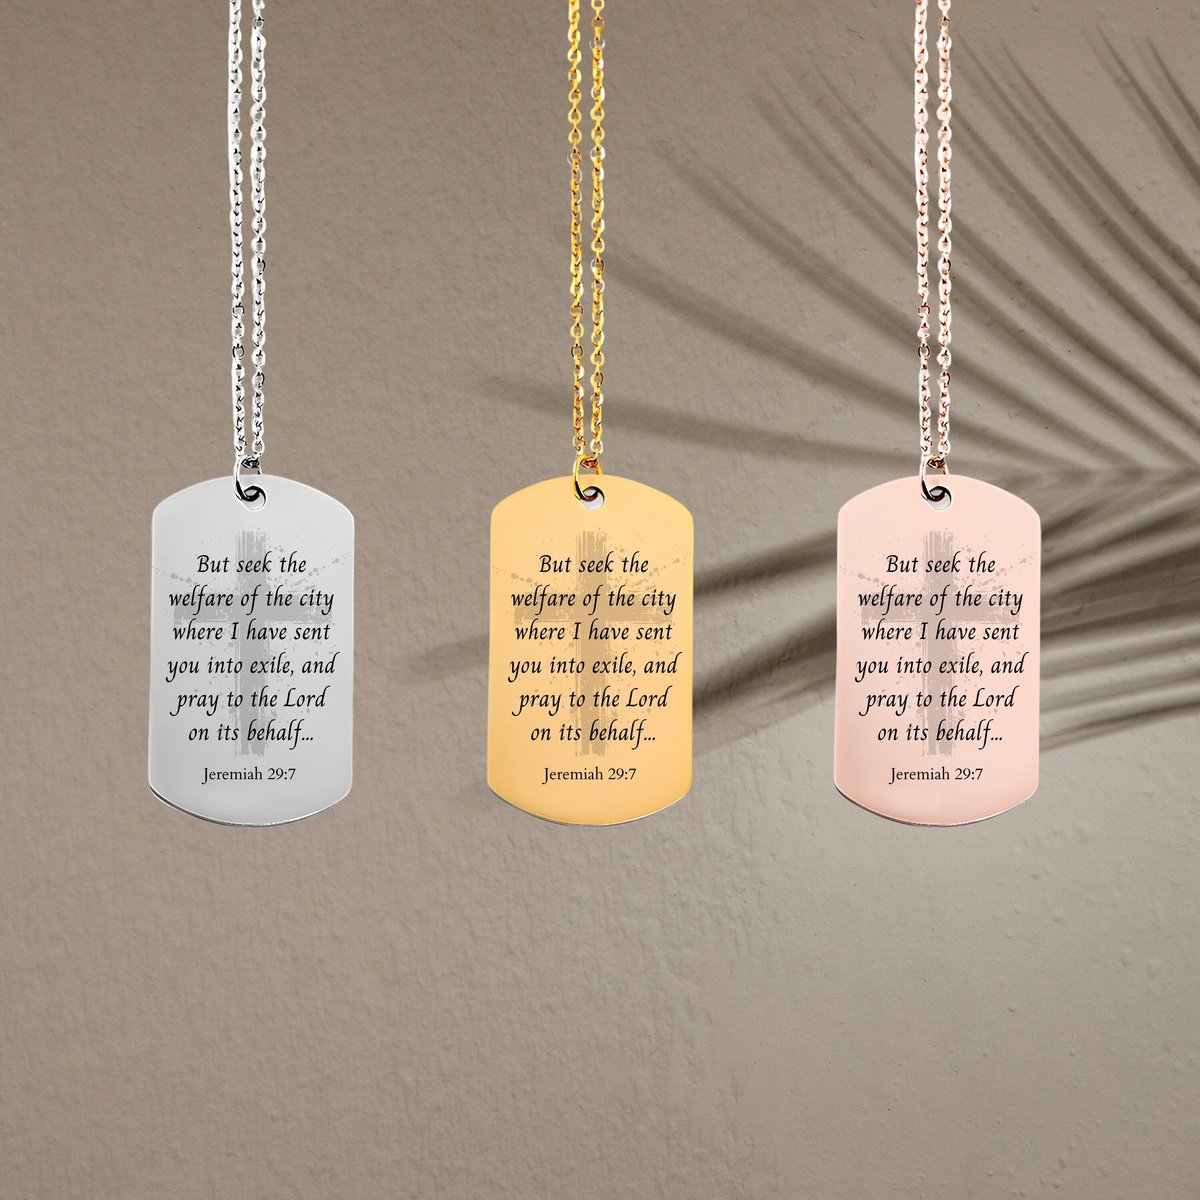 Jeremiah 29 7 quote necklace, gold bible verse, 14k gold cross charm necklace, confirmation gift, gold bar tag necklace, religious scripture